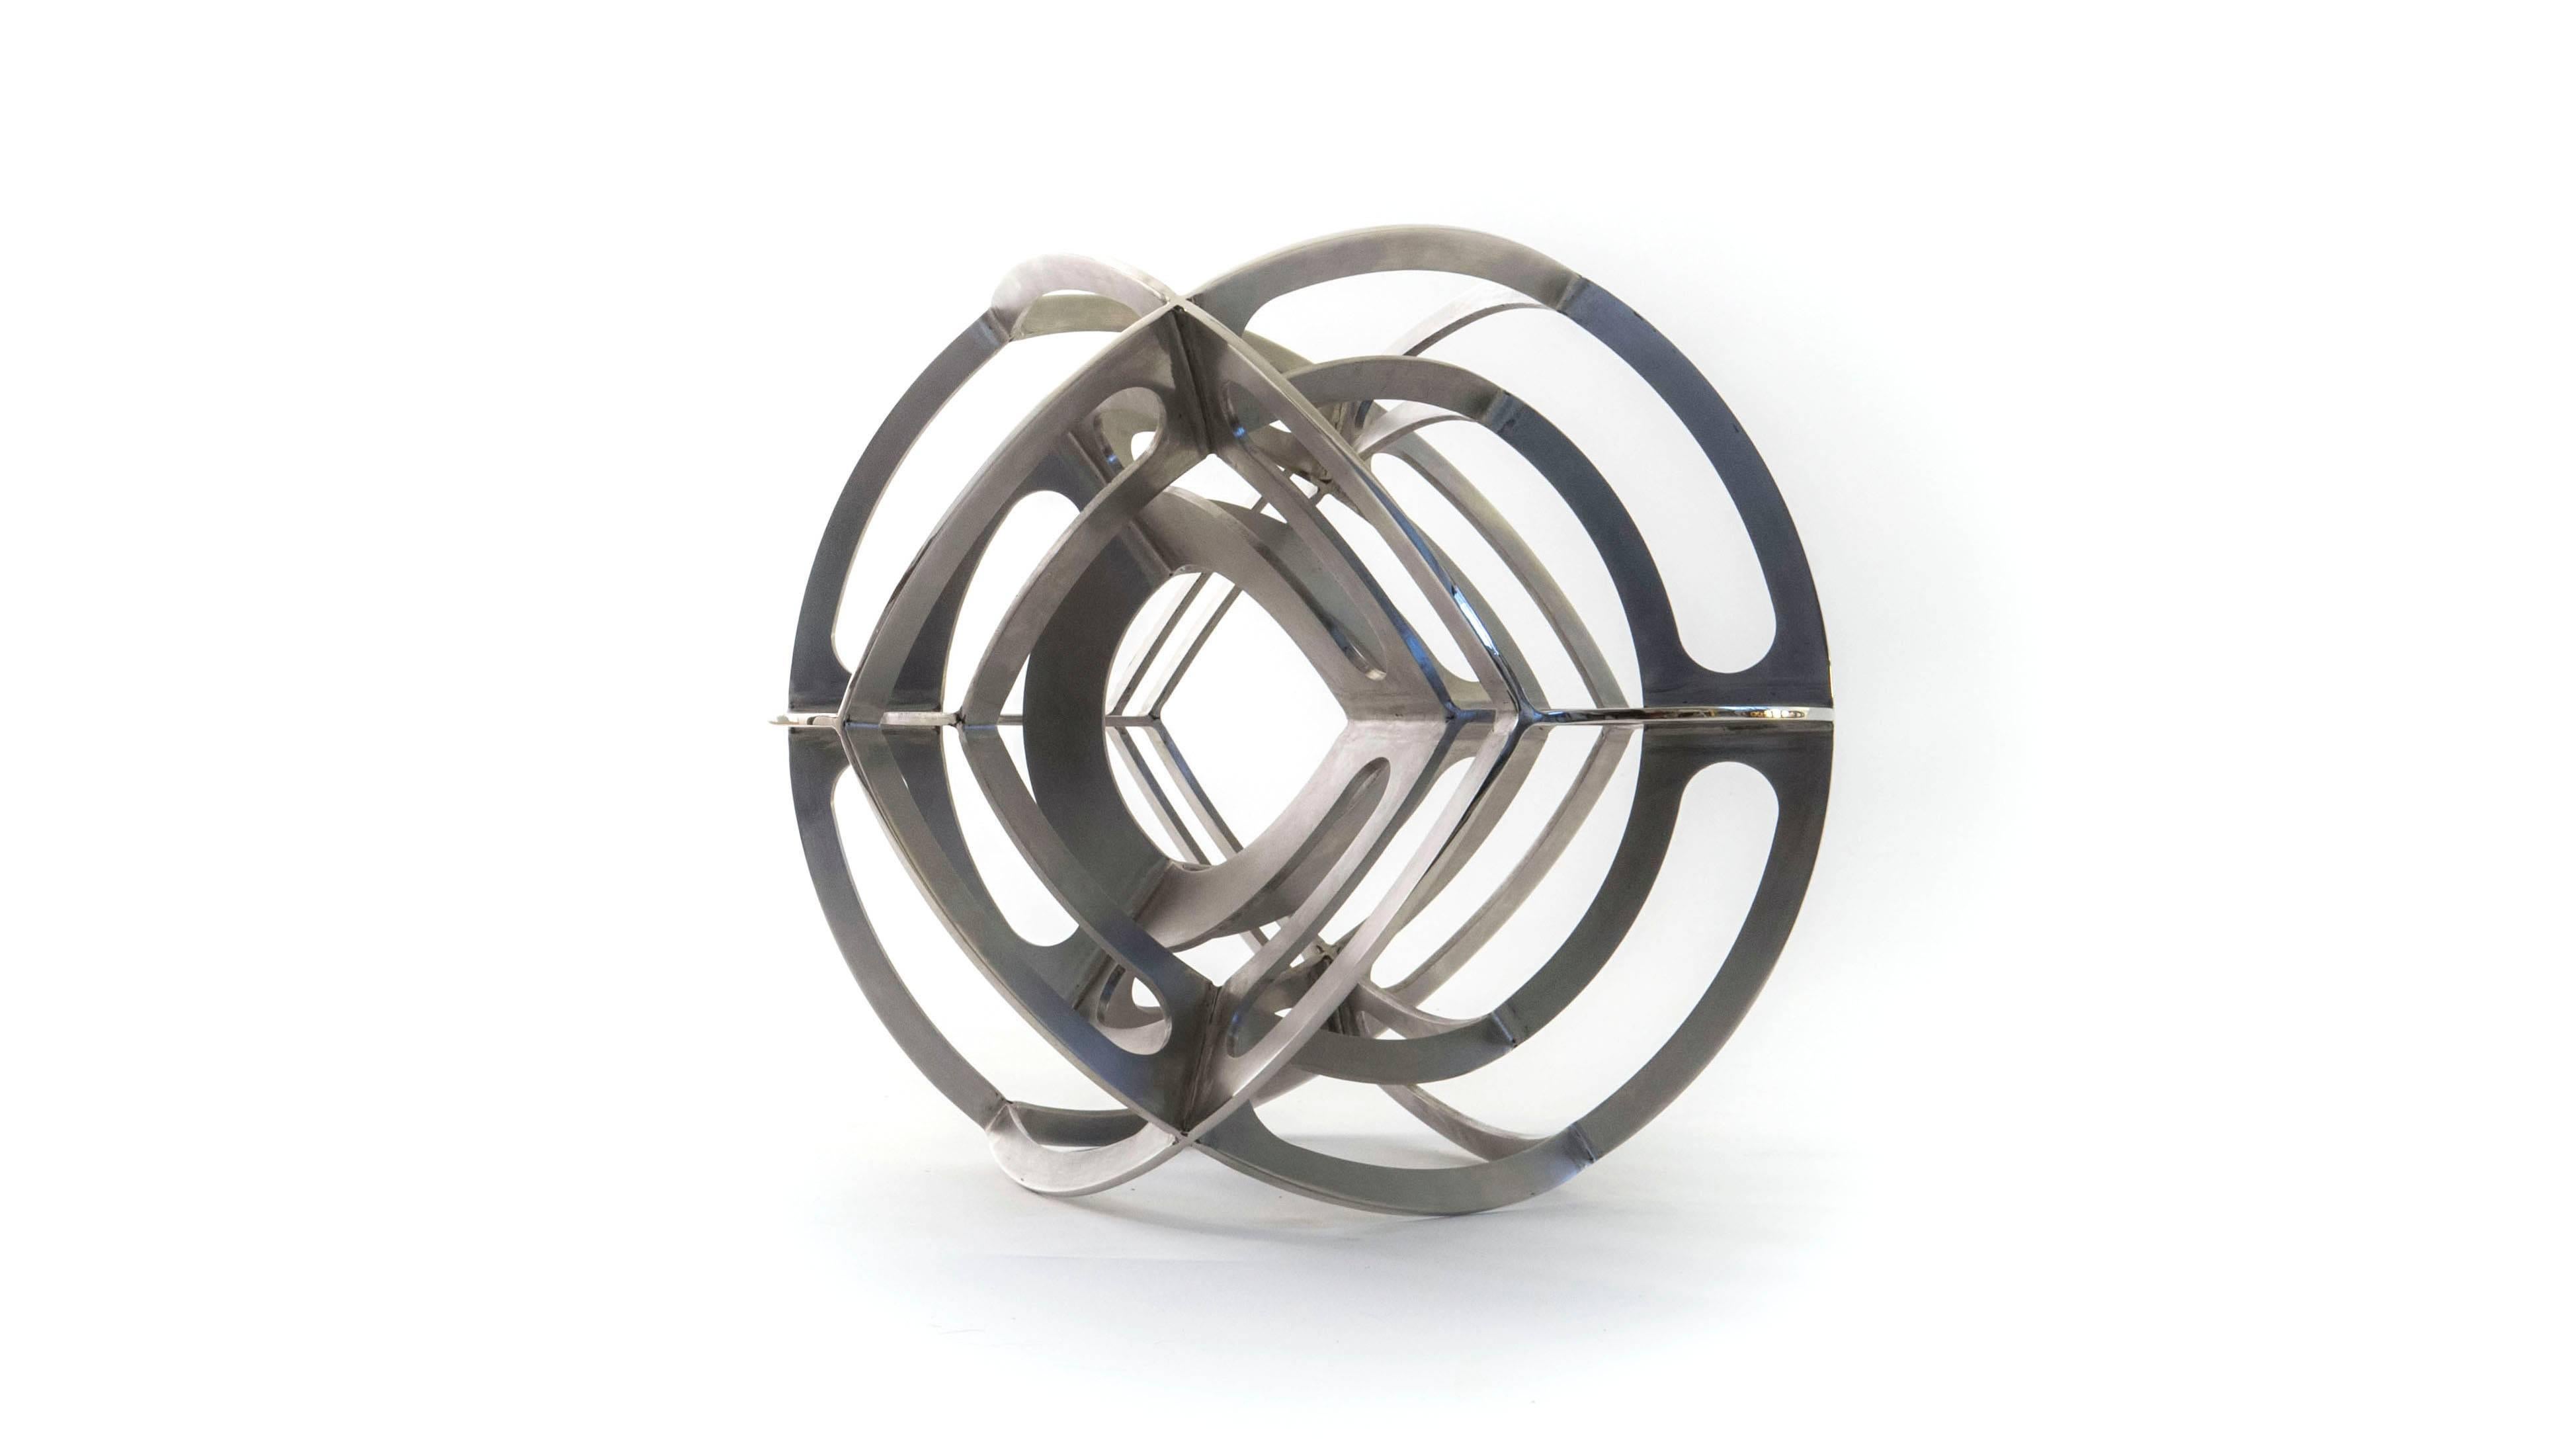 Welded Contemporary Mexican Geometric Dual Tetrahedron Sphere Stainless Steel Sculpture For Sale